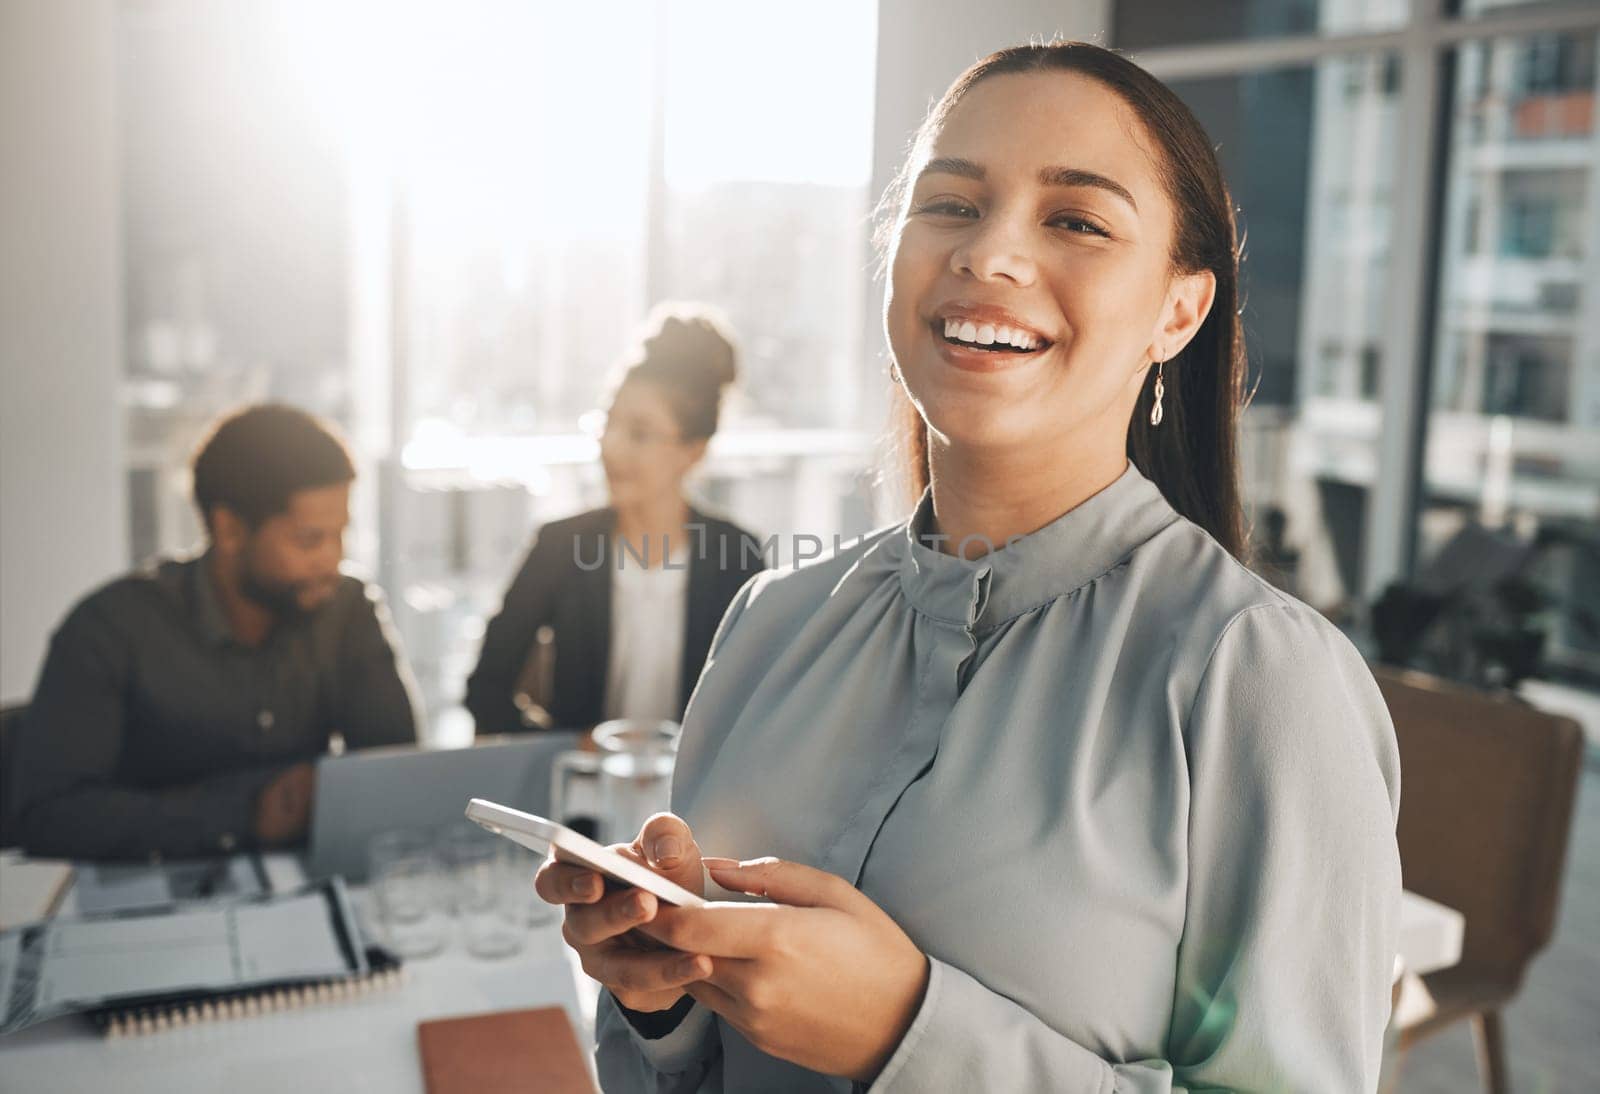 Portrait, phone and vision with a business black woman in her office, sending a text message for communication. Smile, mobile and contact with a happy female employee networking or texting at work.